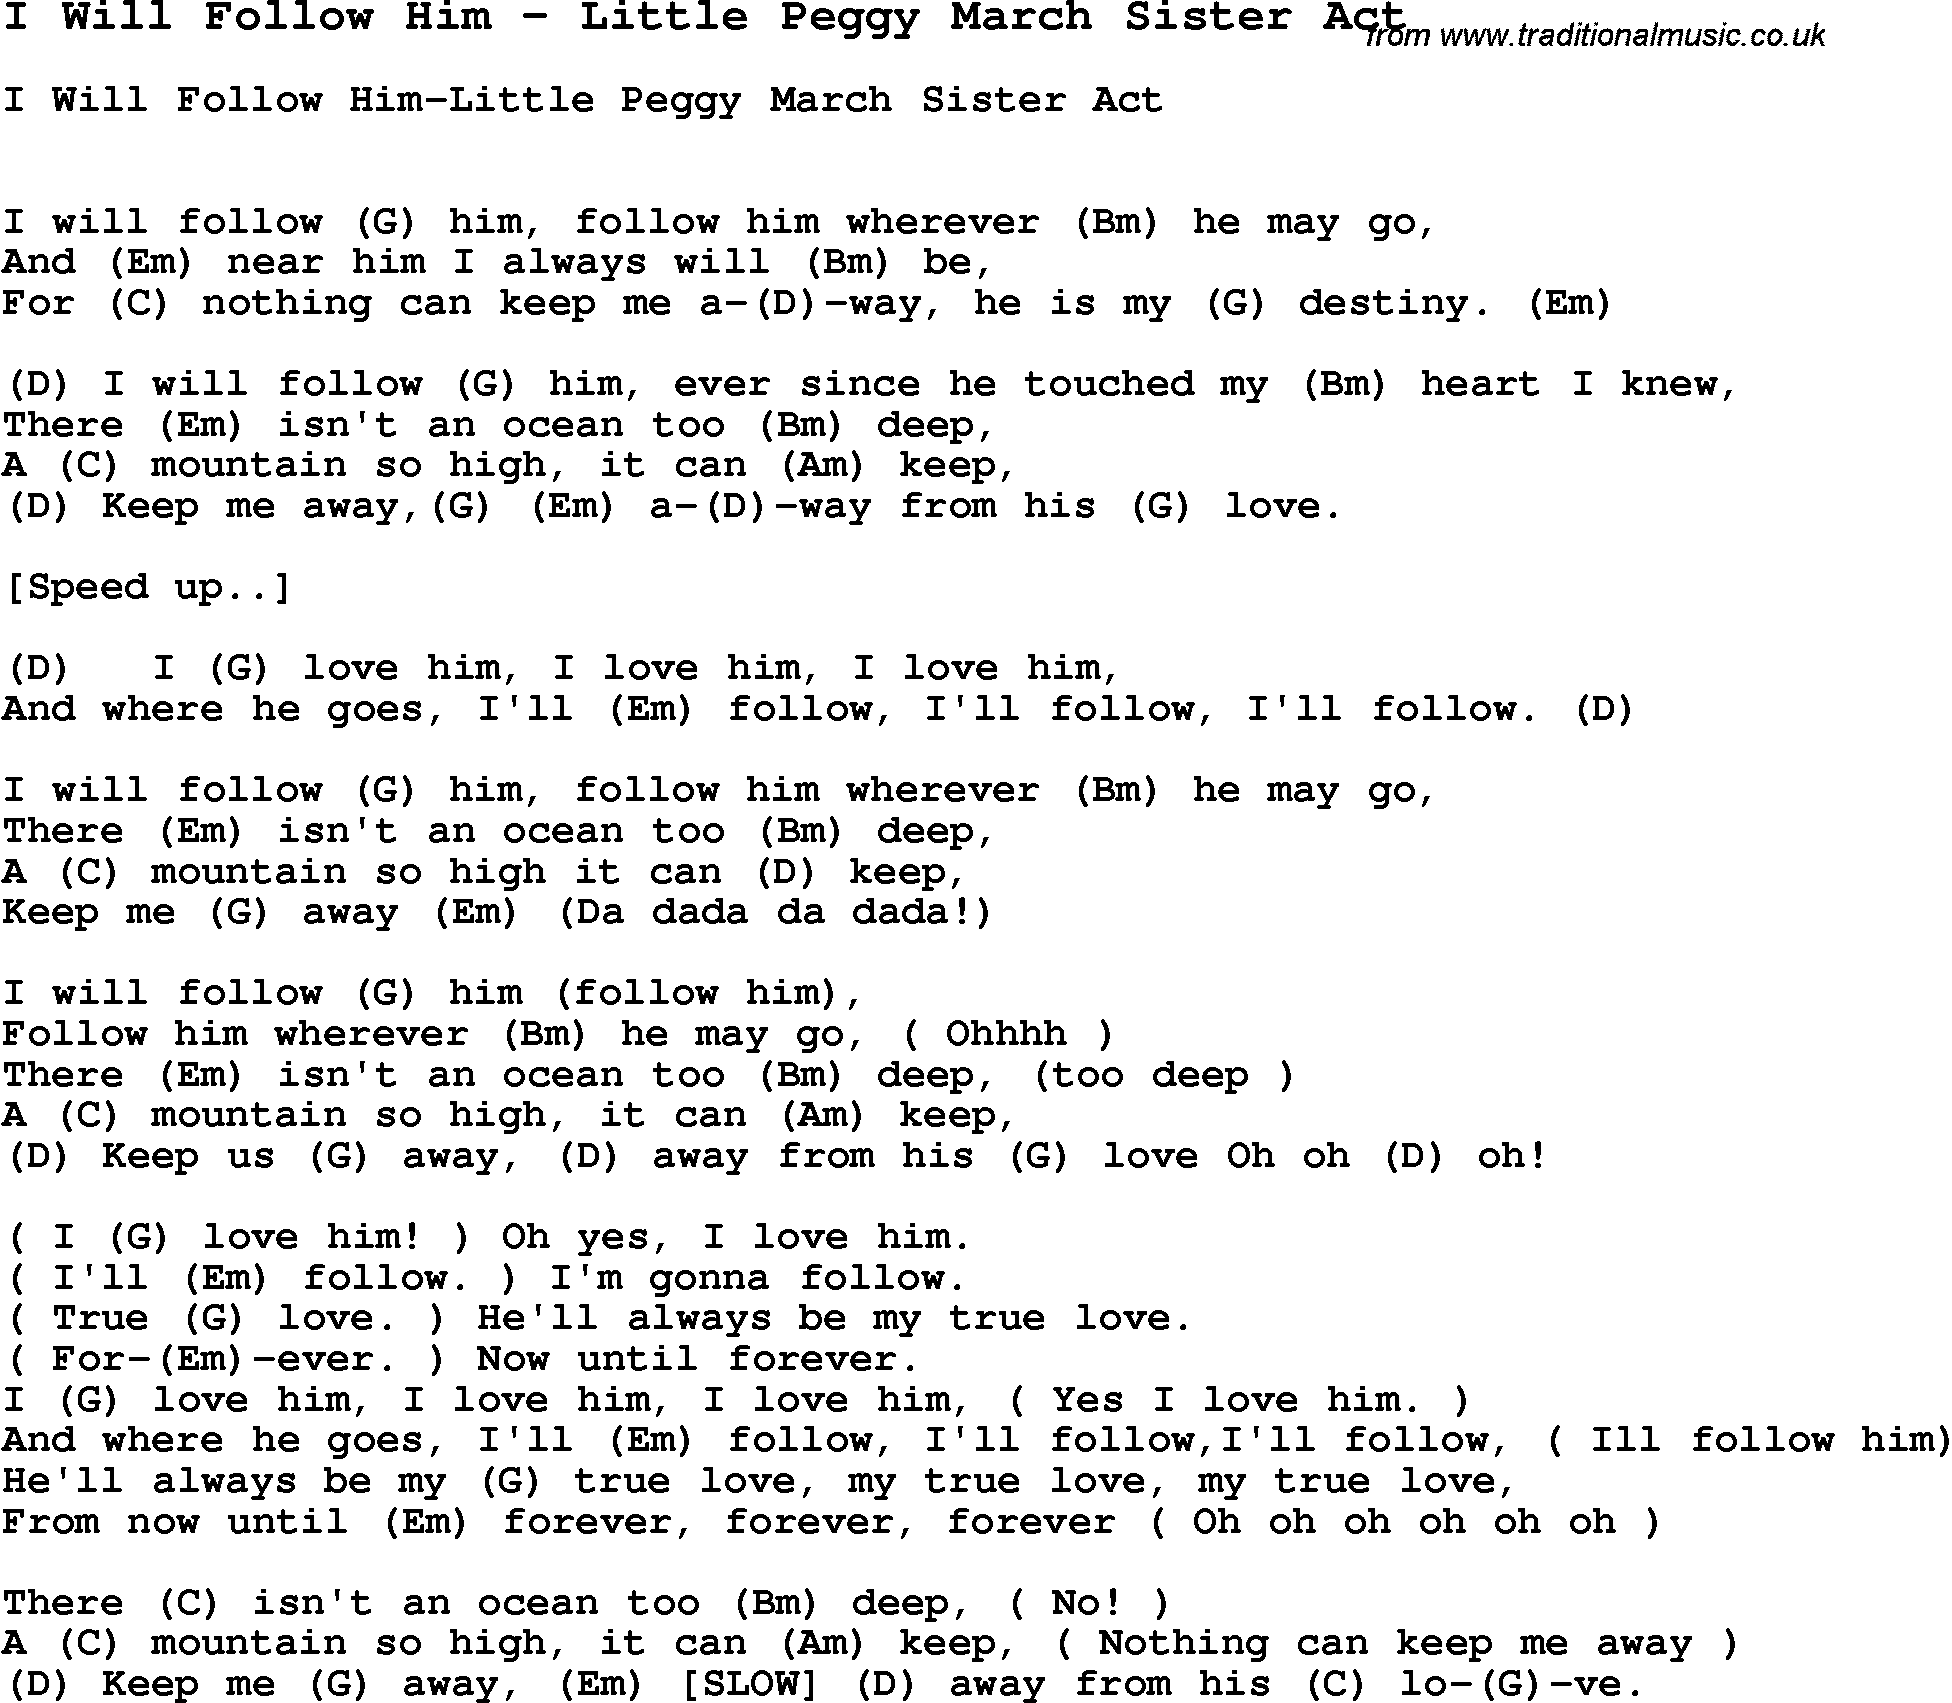 Song I Will Follow Him by Little Peggy March Sister Act, with lyrics for vocal performance and accompaniment chords for Ukulele, Guitar Banjo etc.